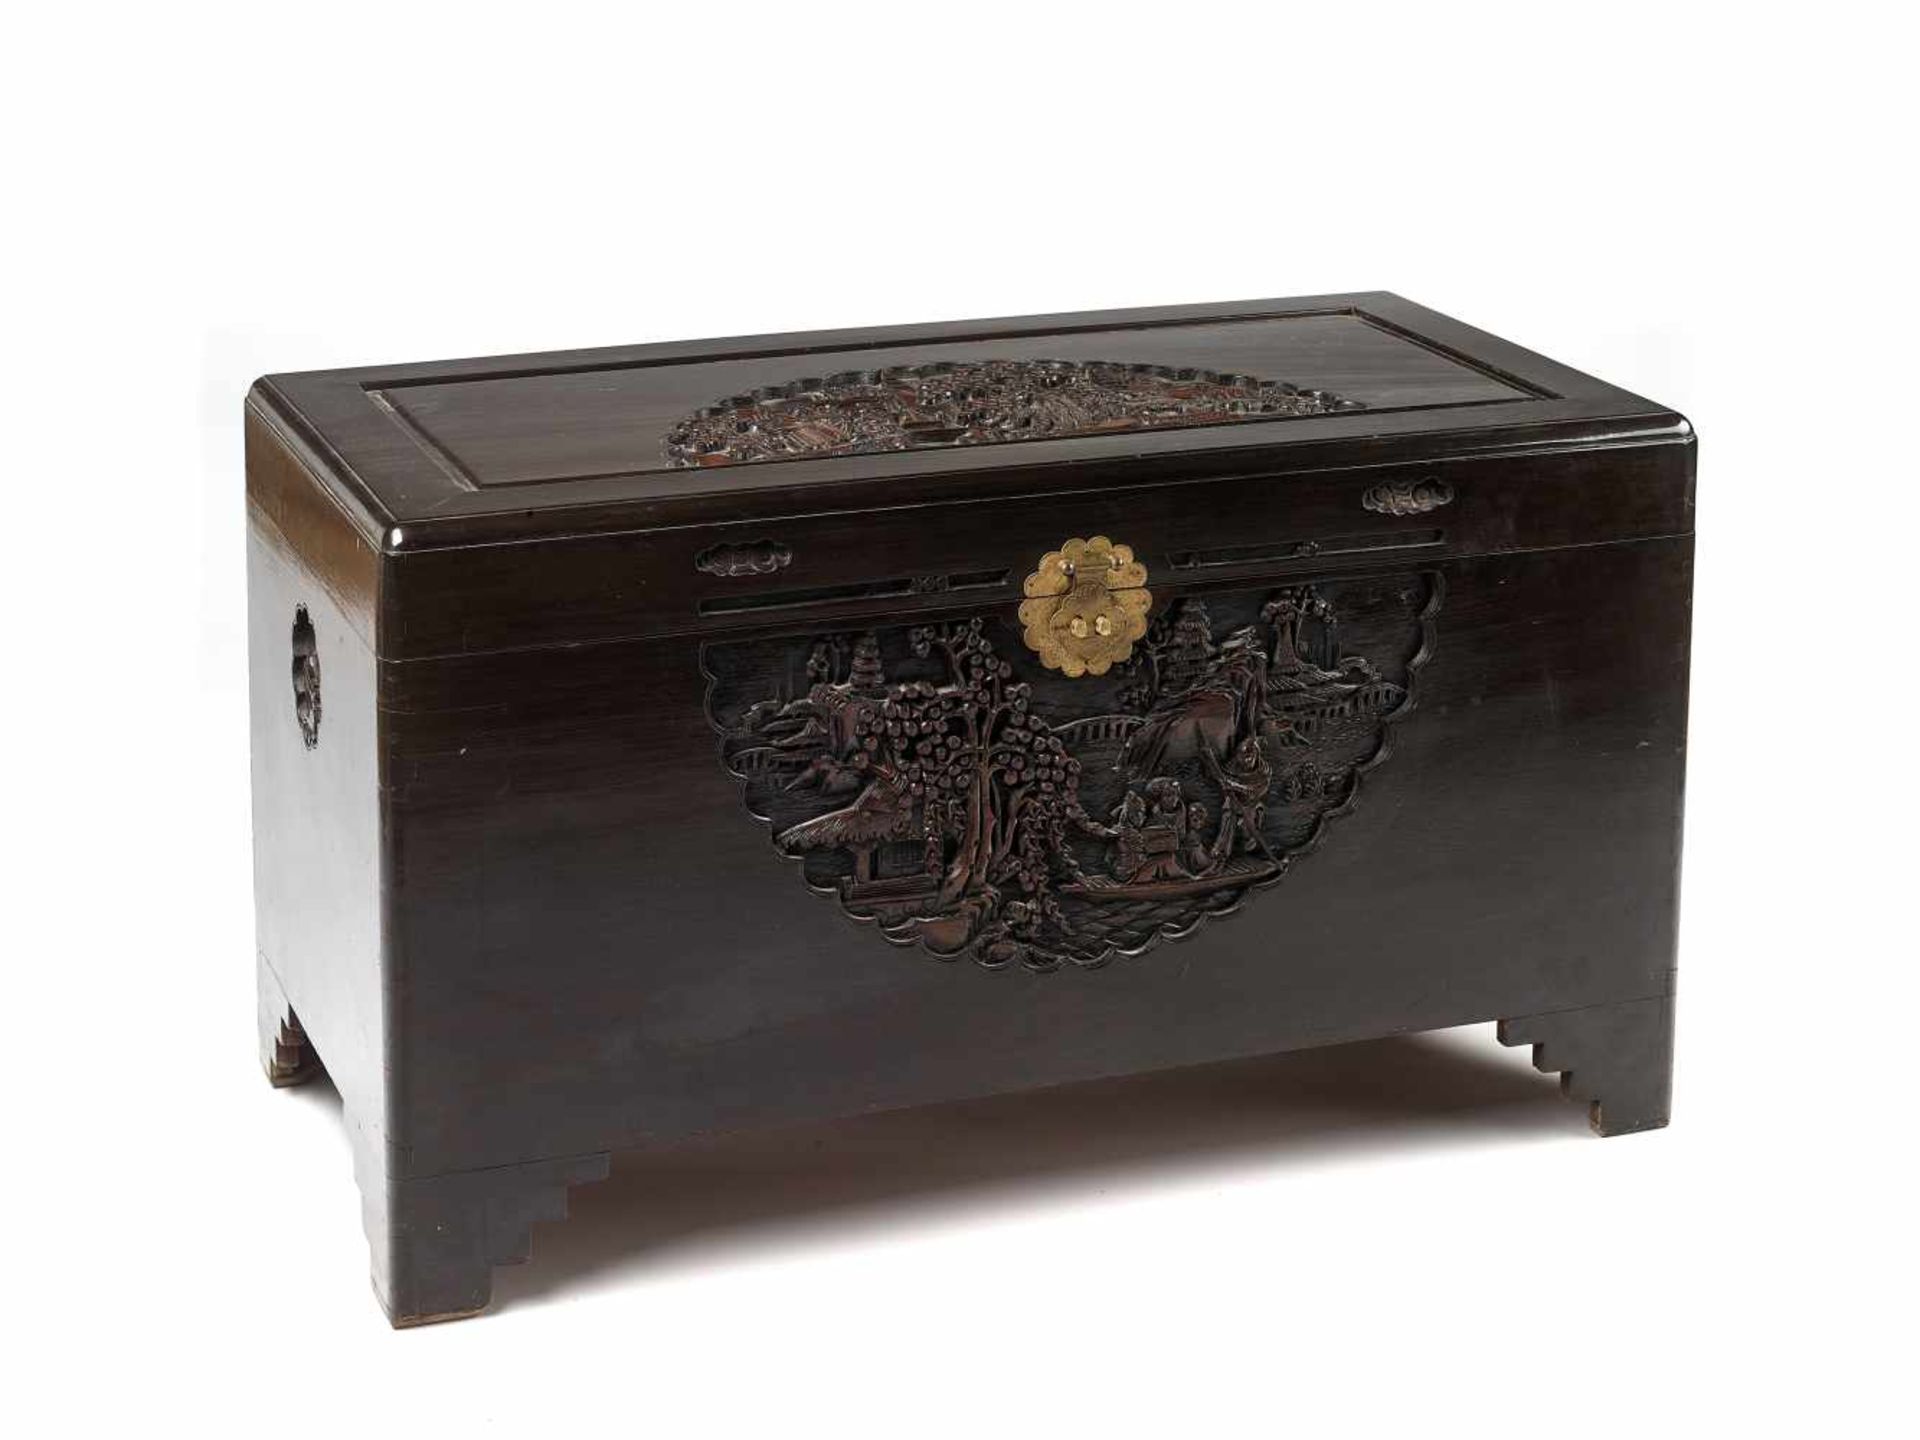 A LARGE CHINESE HARDWOOD CHEST, LATE QING DYNASTY – REPUBLIC PERIODCarved from solid hardwood,